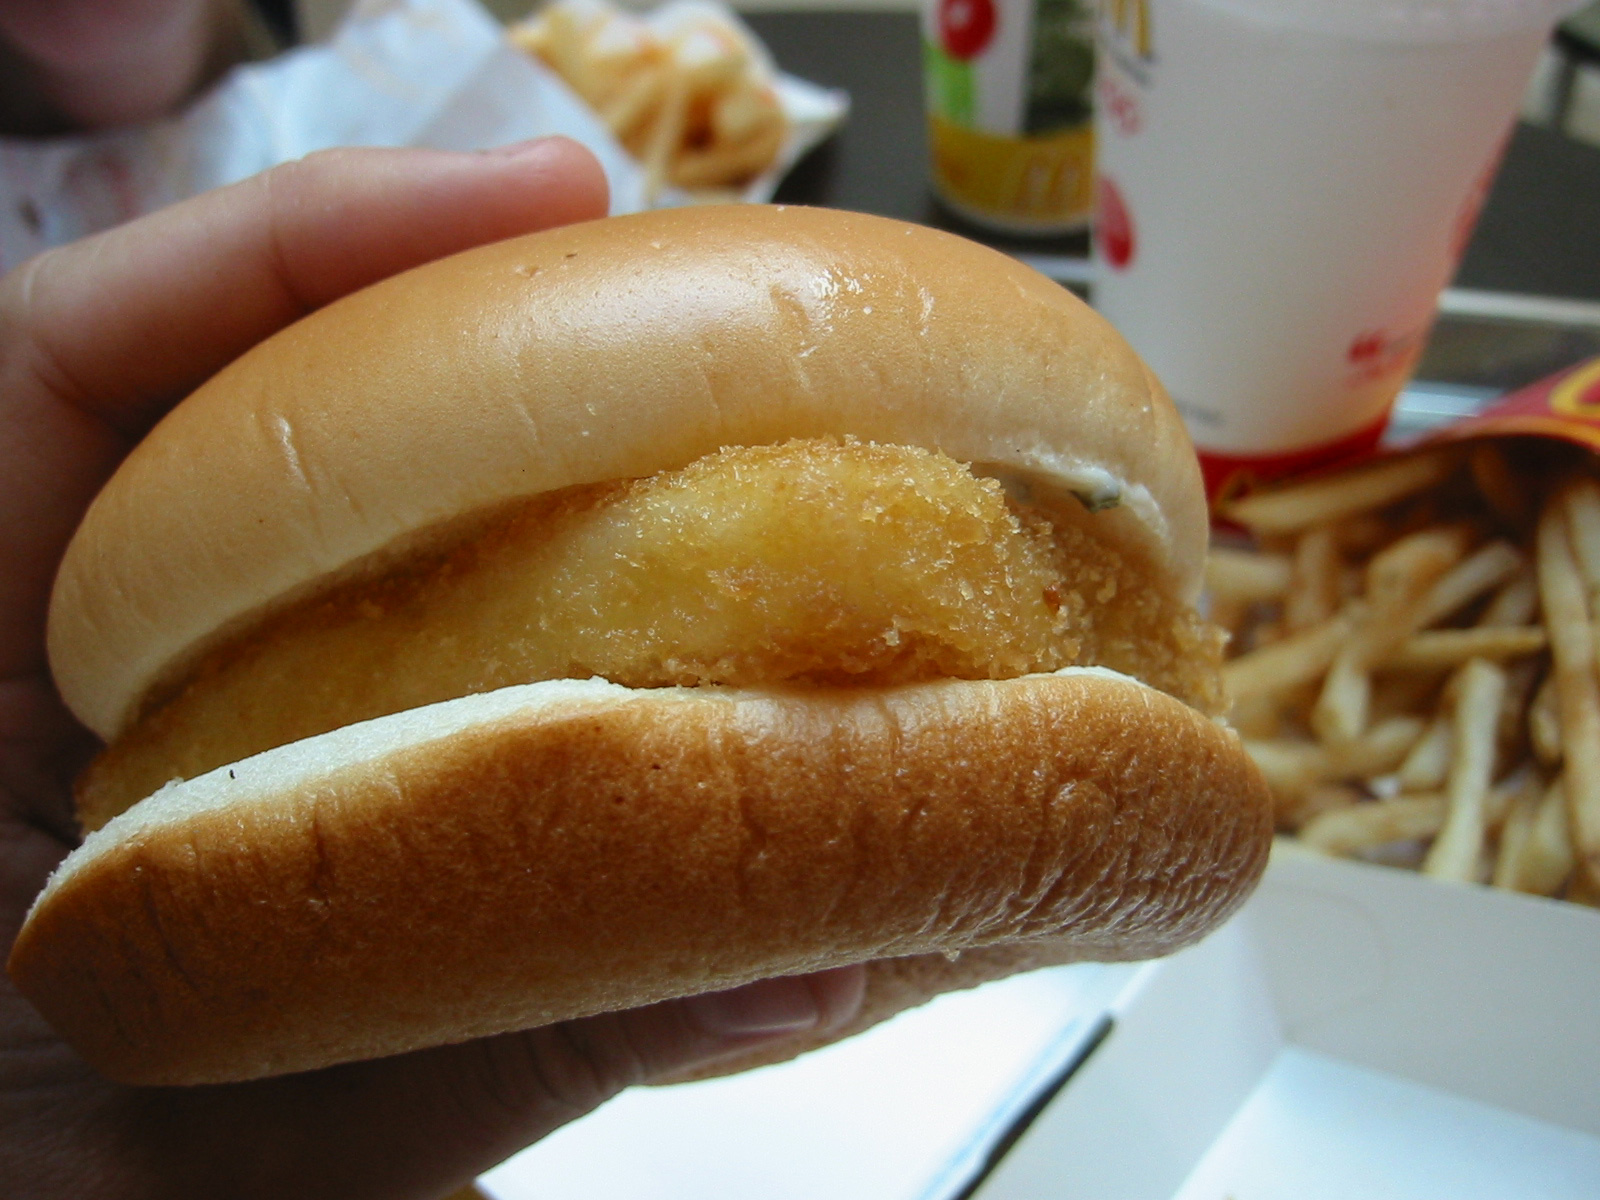 Filet O Fish - I want to sink my teeth into that